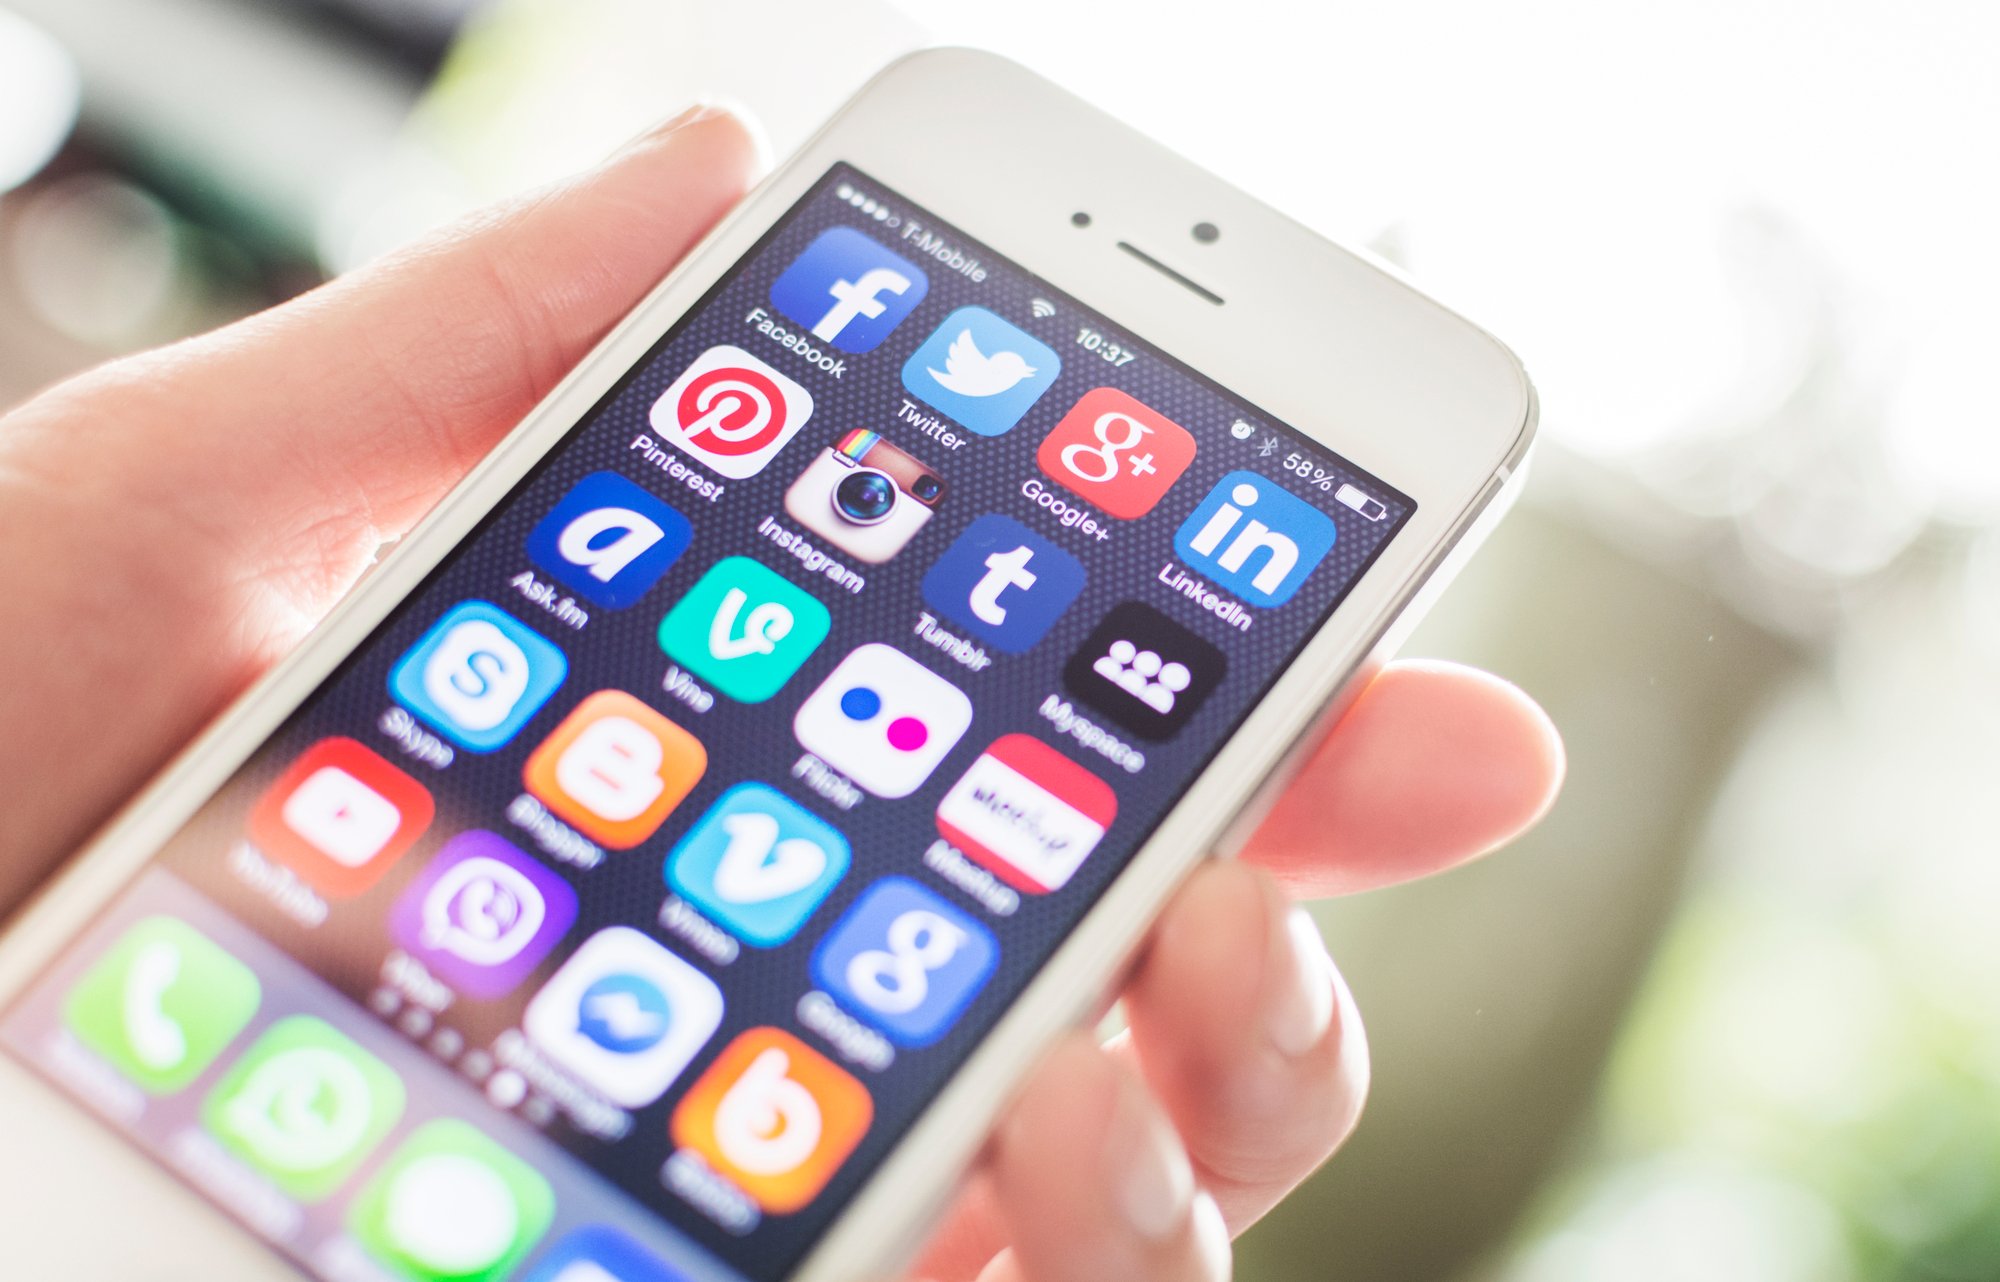 social media apps on iphone